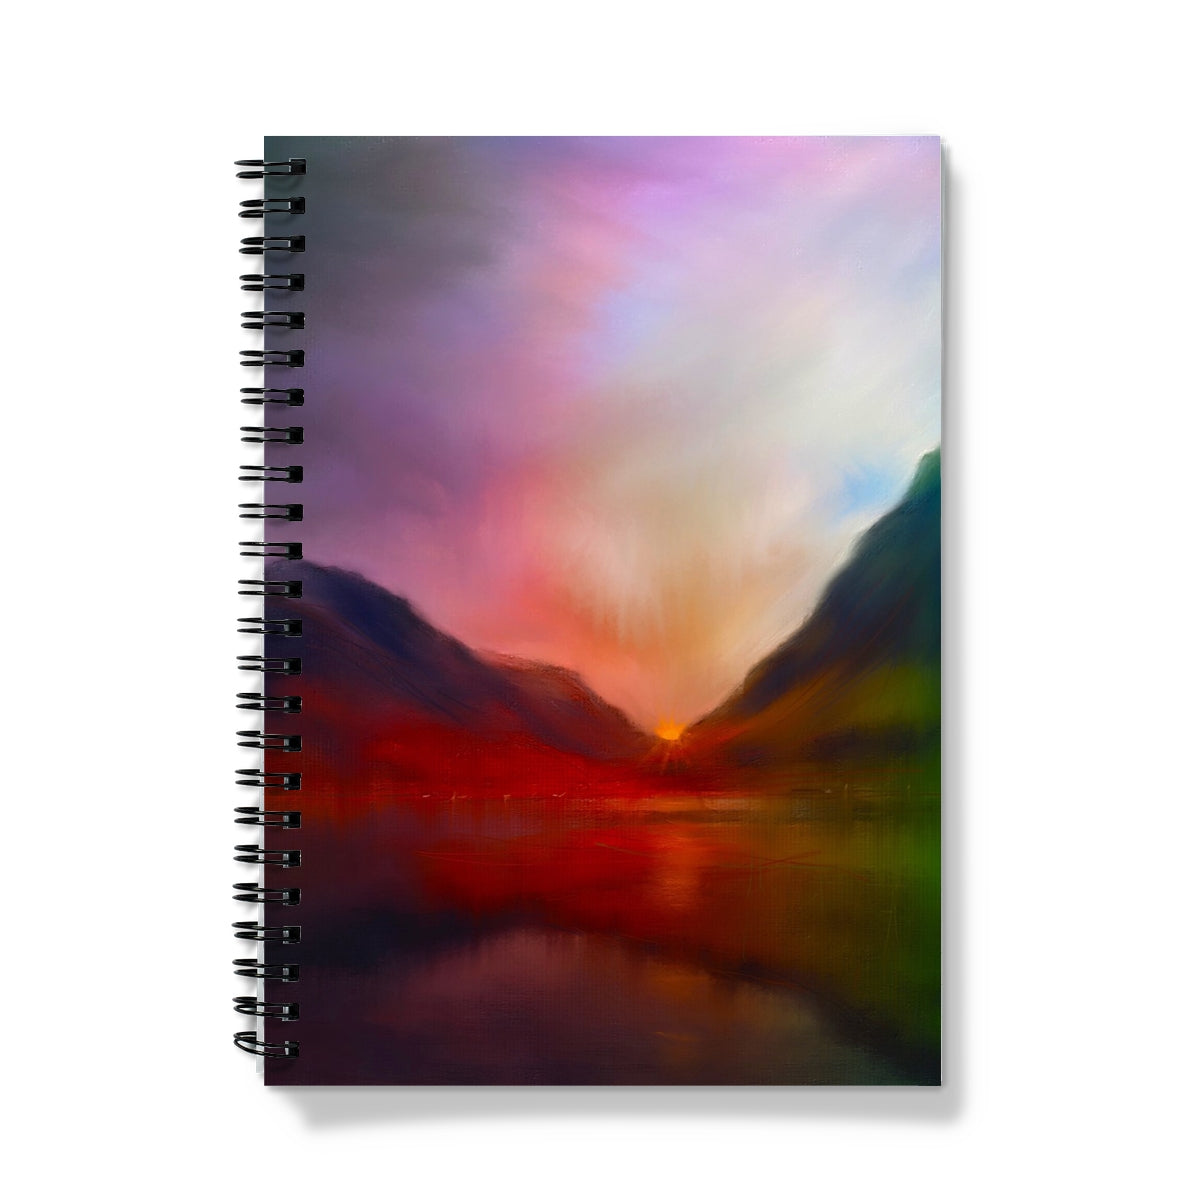 Glencoe Sunset Art Gifts Notebook-Journals & Notebooks-Glencoe Art Gallery-A4-Lined-Paintings, Prints, Homeware, Art Gifts From Scotland By Scottish Artist Kevin Hunter